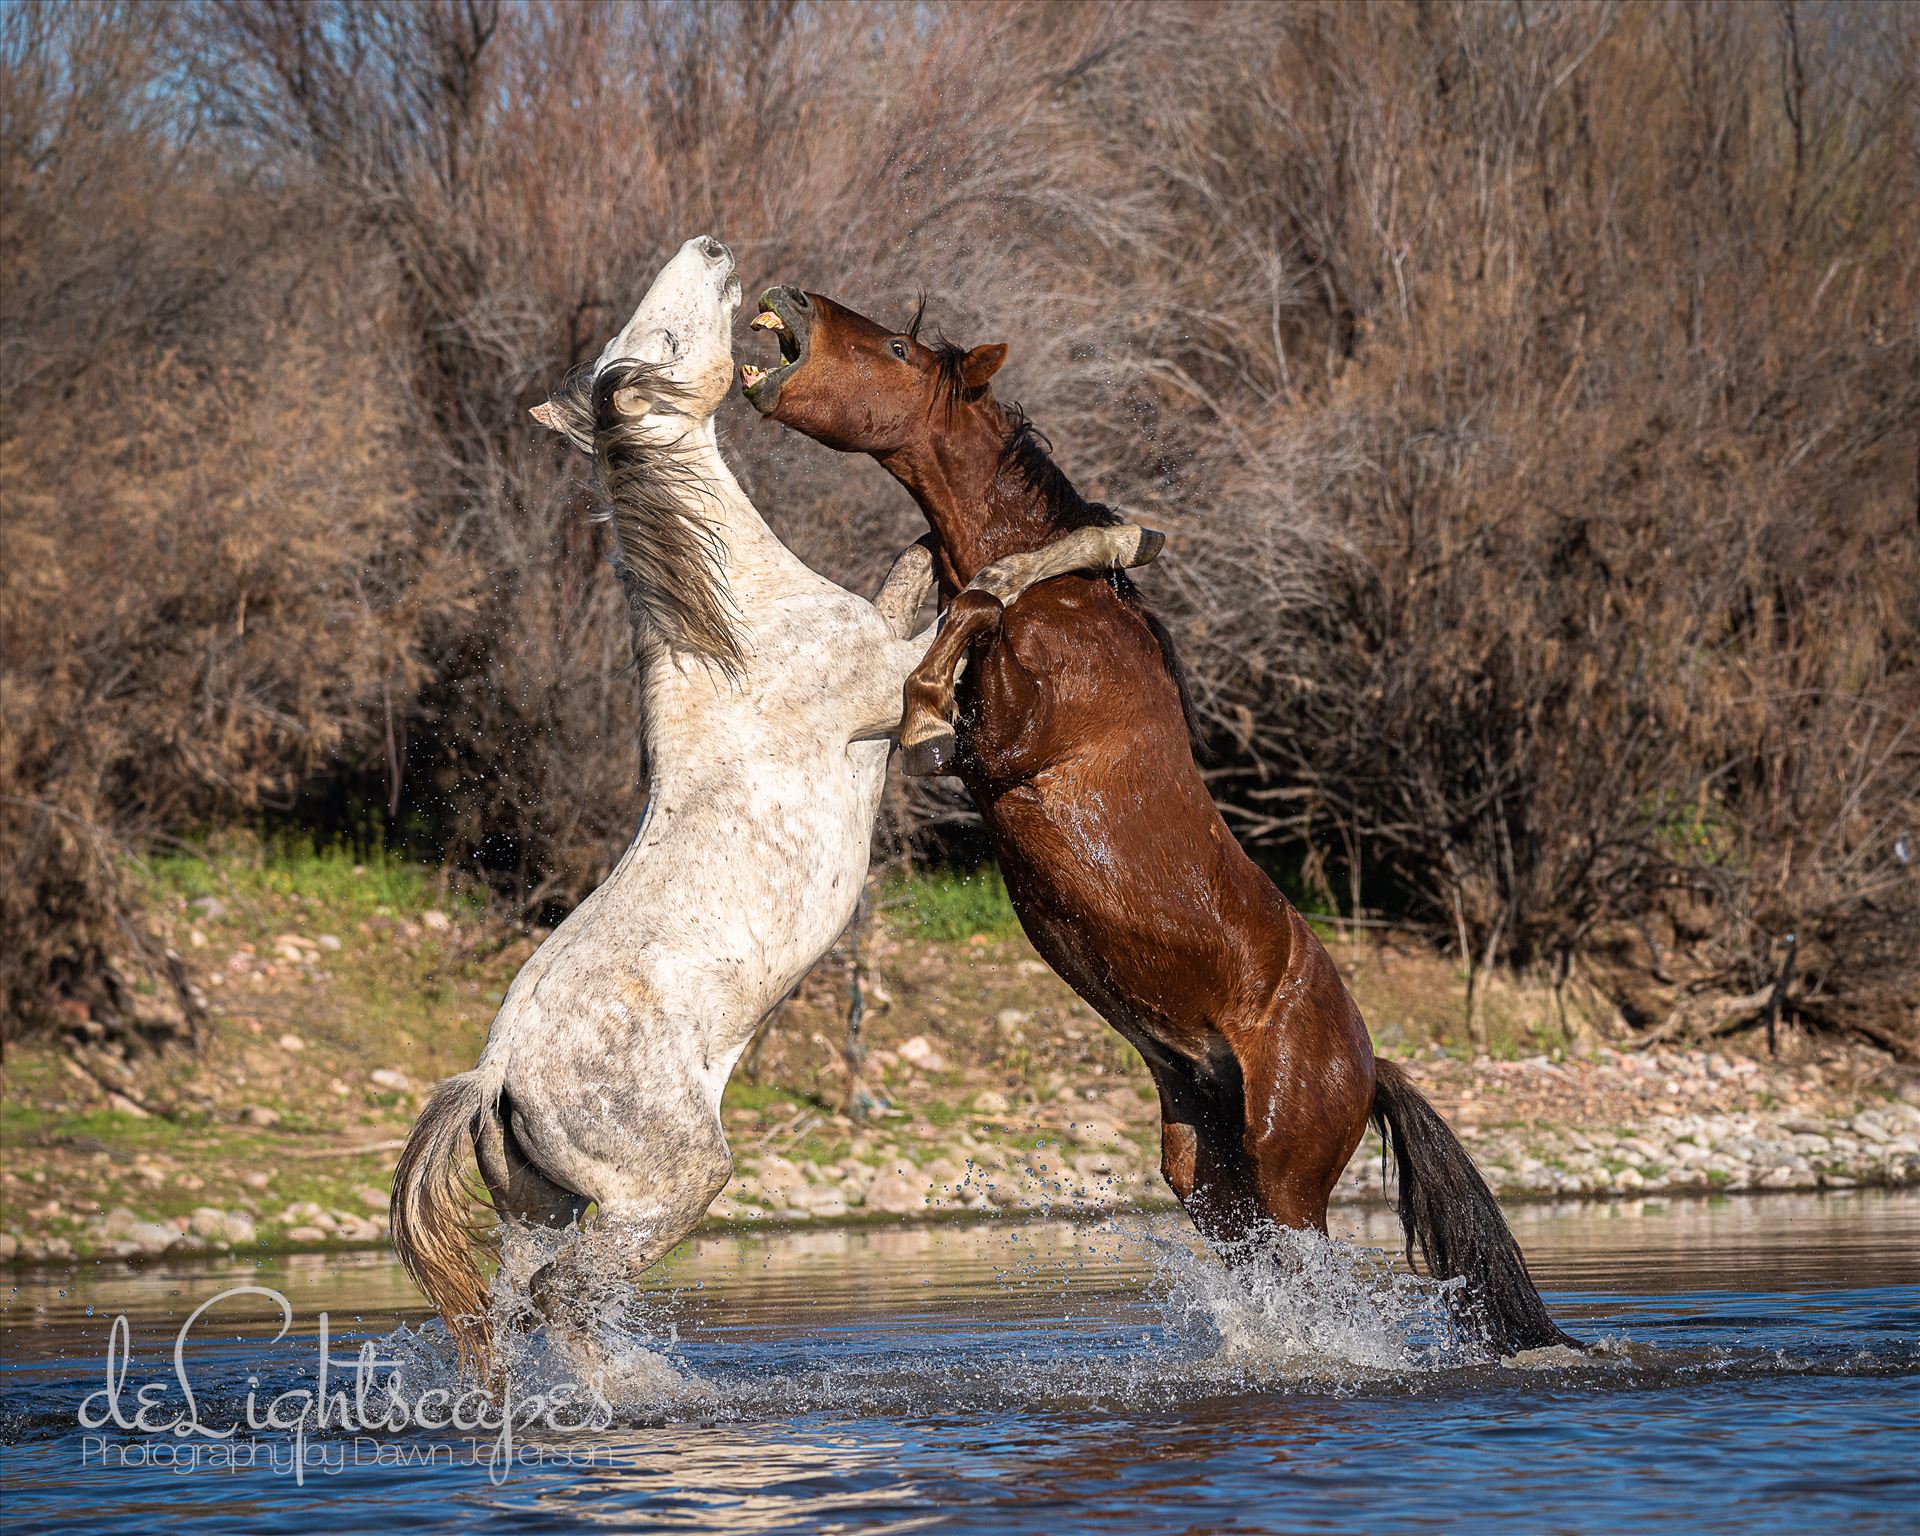 Hold Your Horses -  by Dawn Jefferson